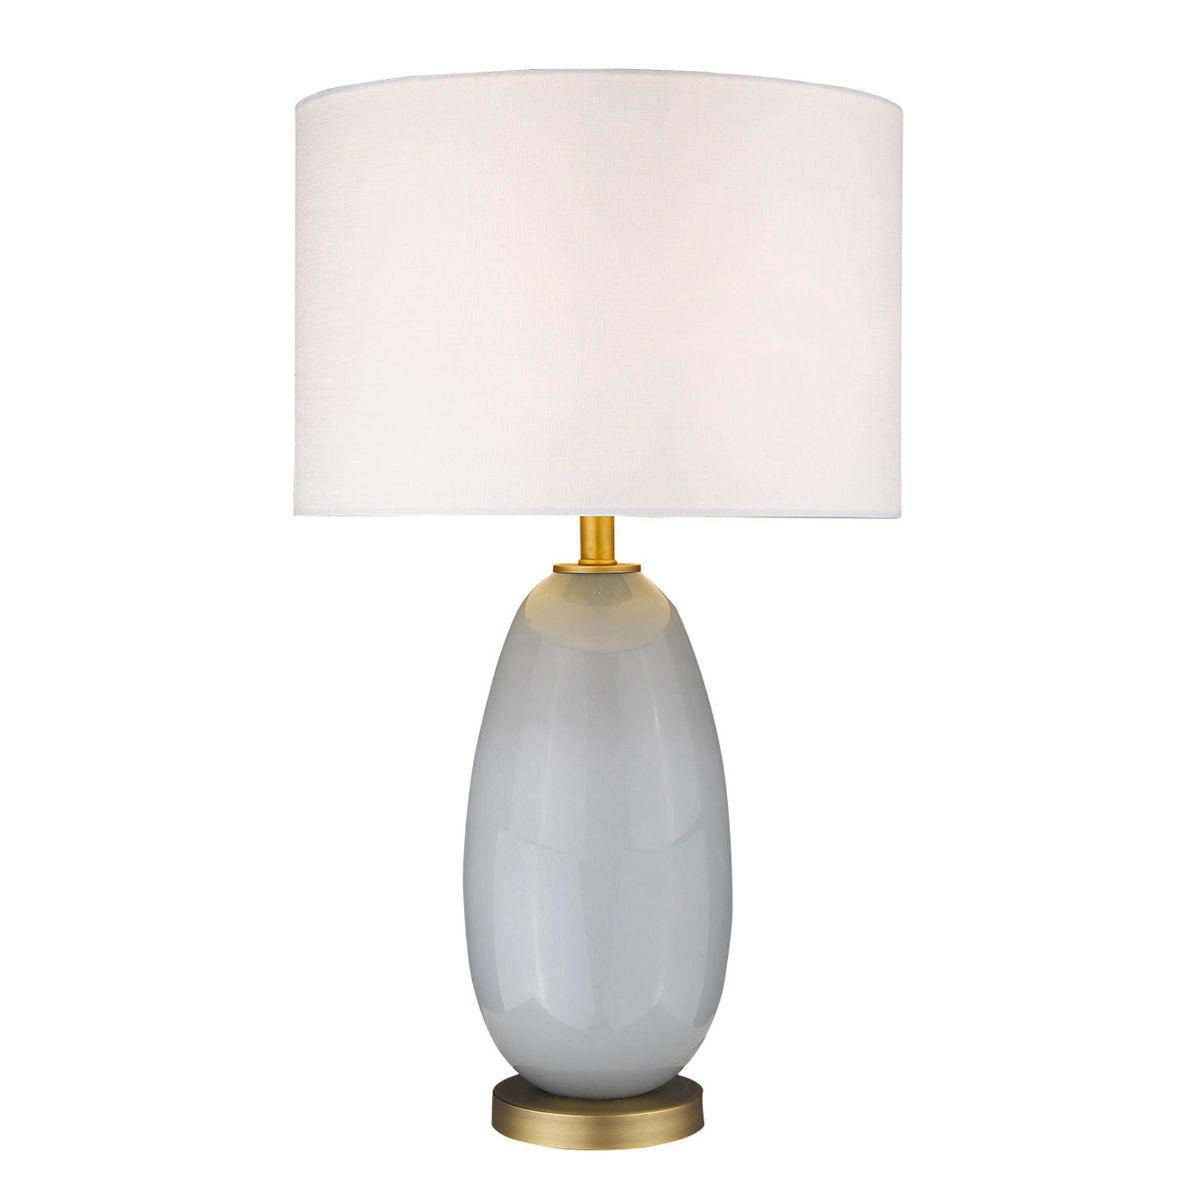 Trend Home 1 Light Table Lamp Misty White Glass Body and Brass Accents